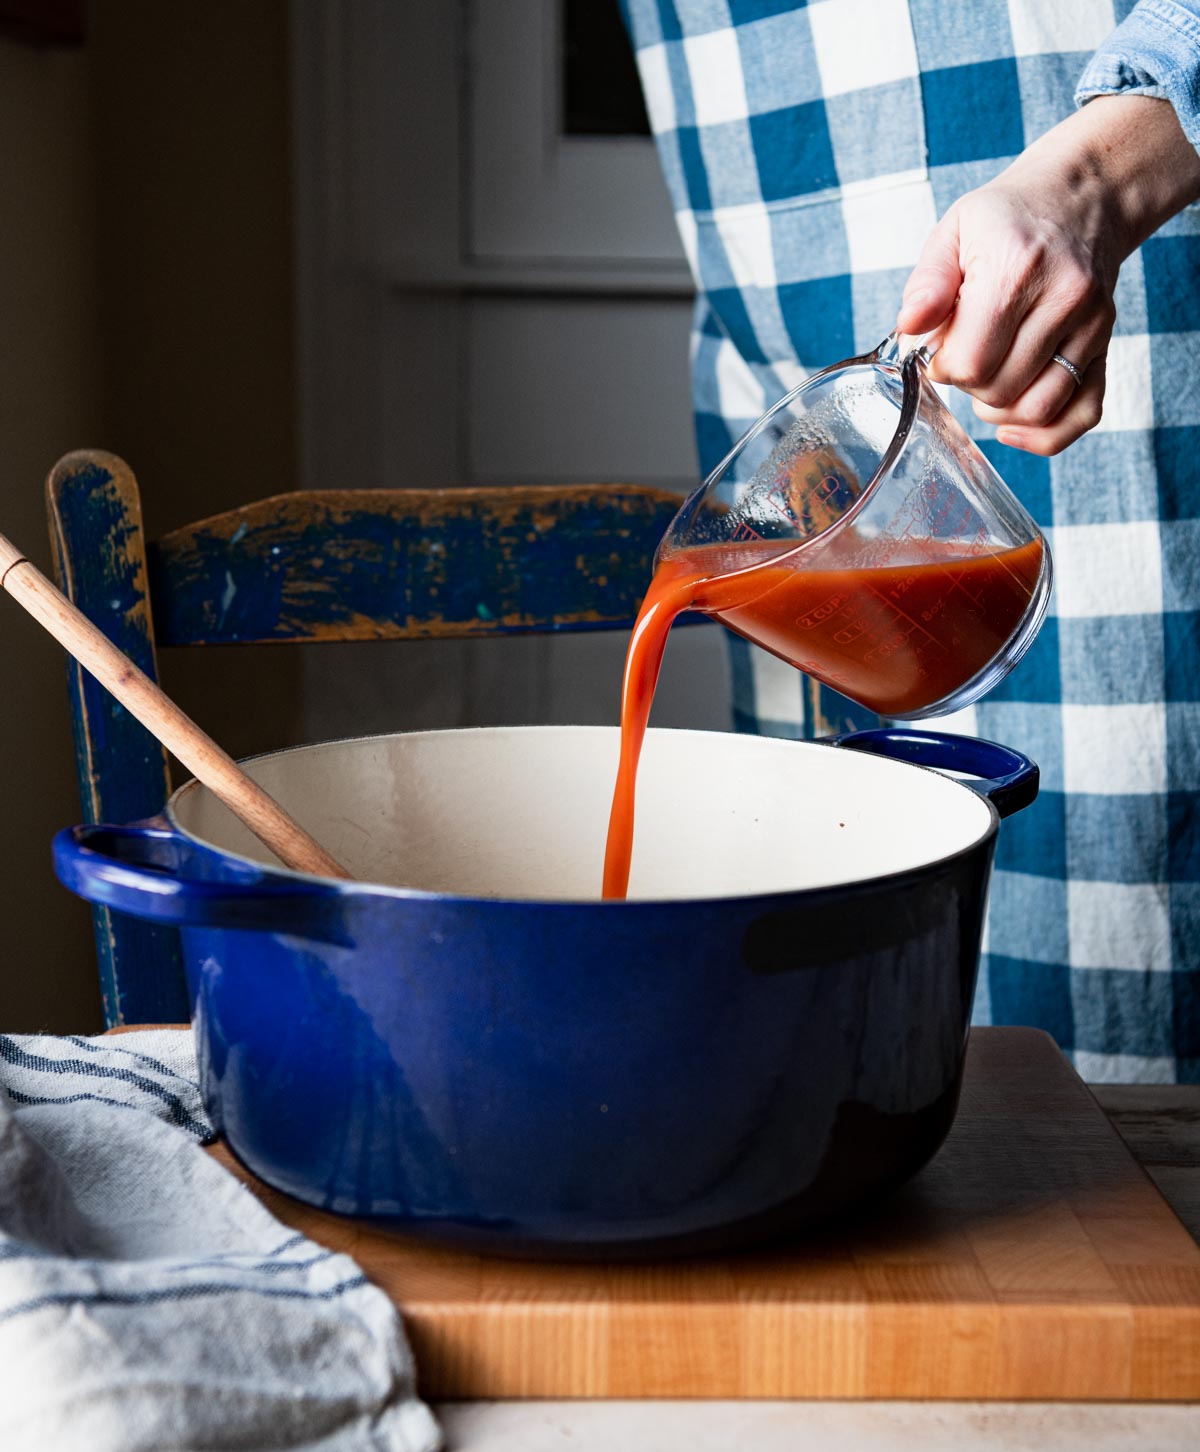 Pouring tomato juice into a Dutch oven